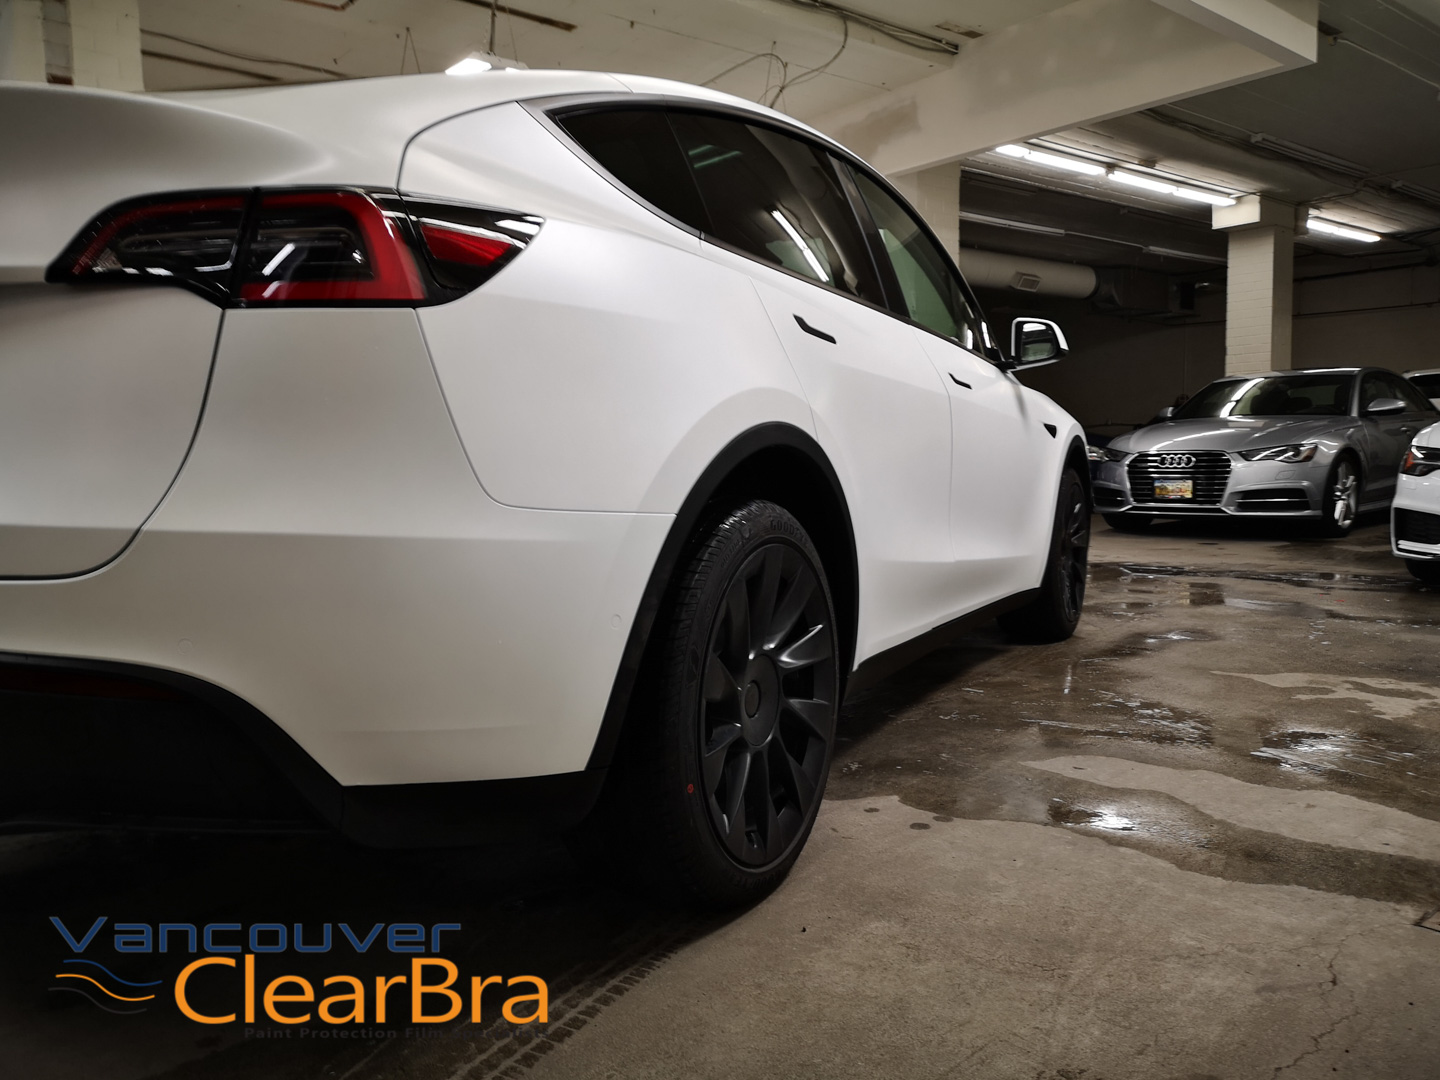 https://blog.vancouverclearbra.com/wp-content/uploads/2021/05/xpel-ultimate-xpel-stealth-satin-clear-bra-paint-protection-film-Vancouver-ClearBra-191.jpg